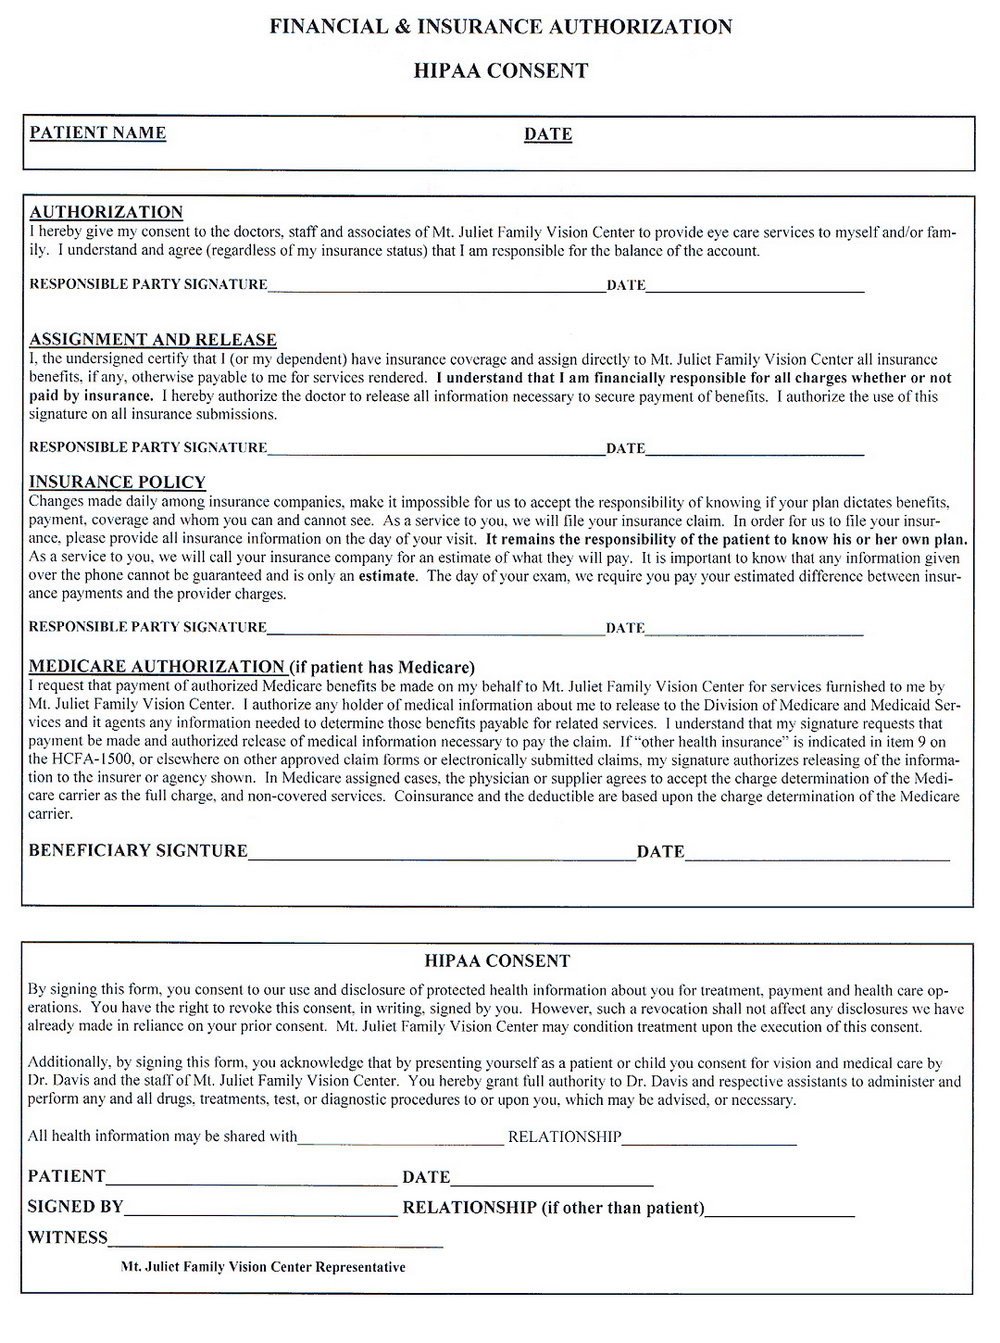 Hipaa Compliance forms for Employers Hipaa forms Printable 2018 Of Home Design